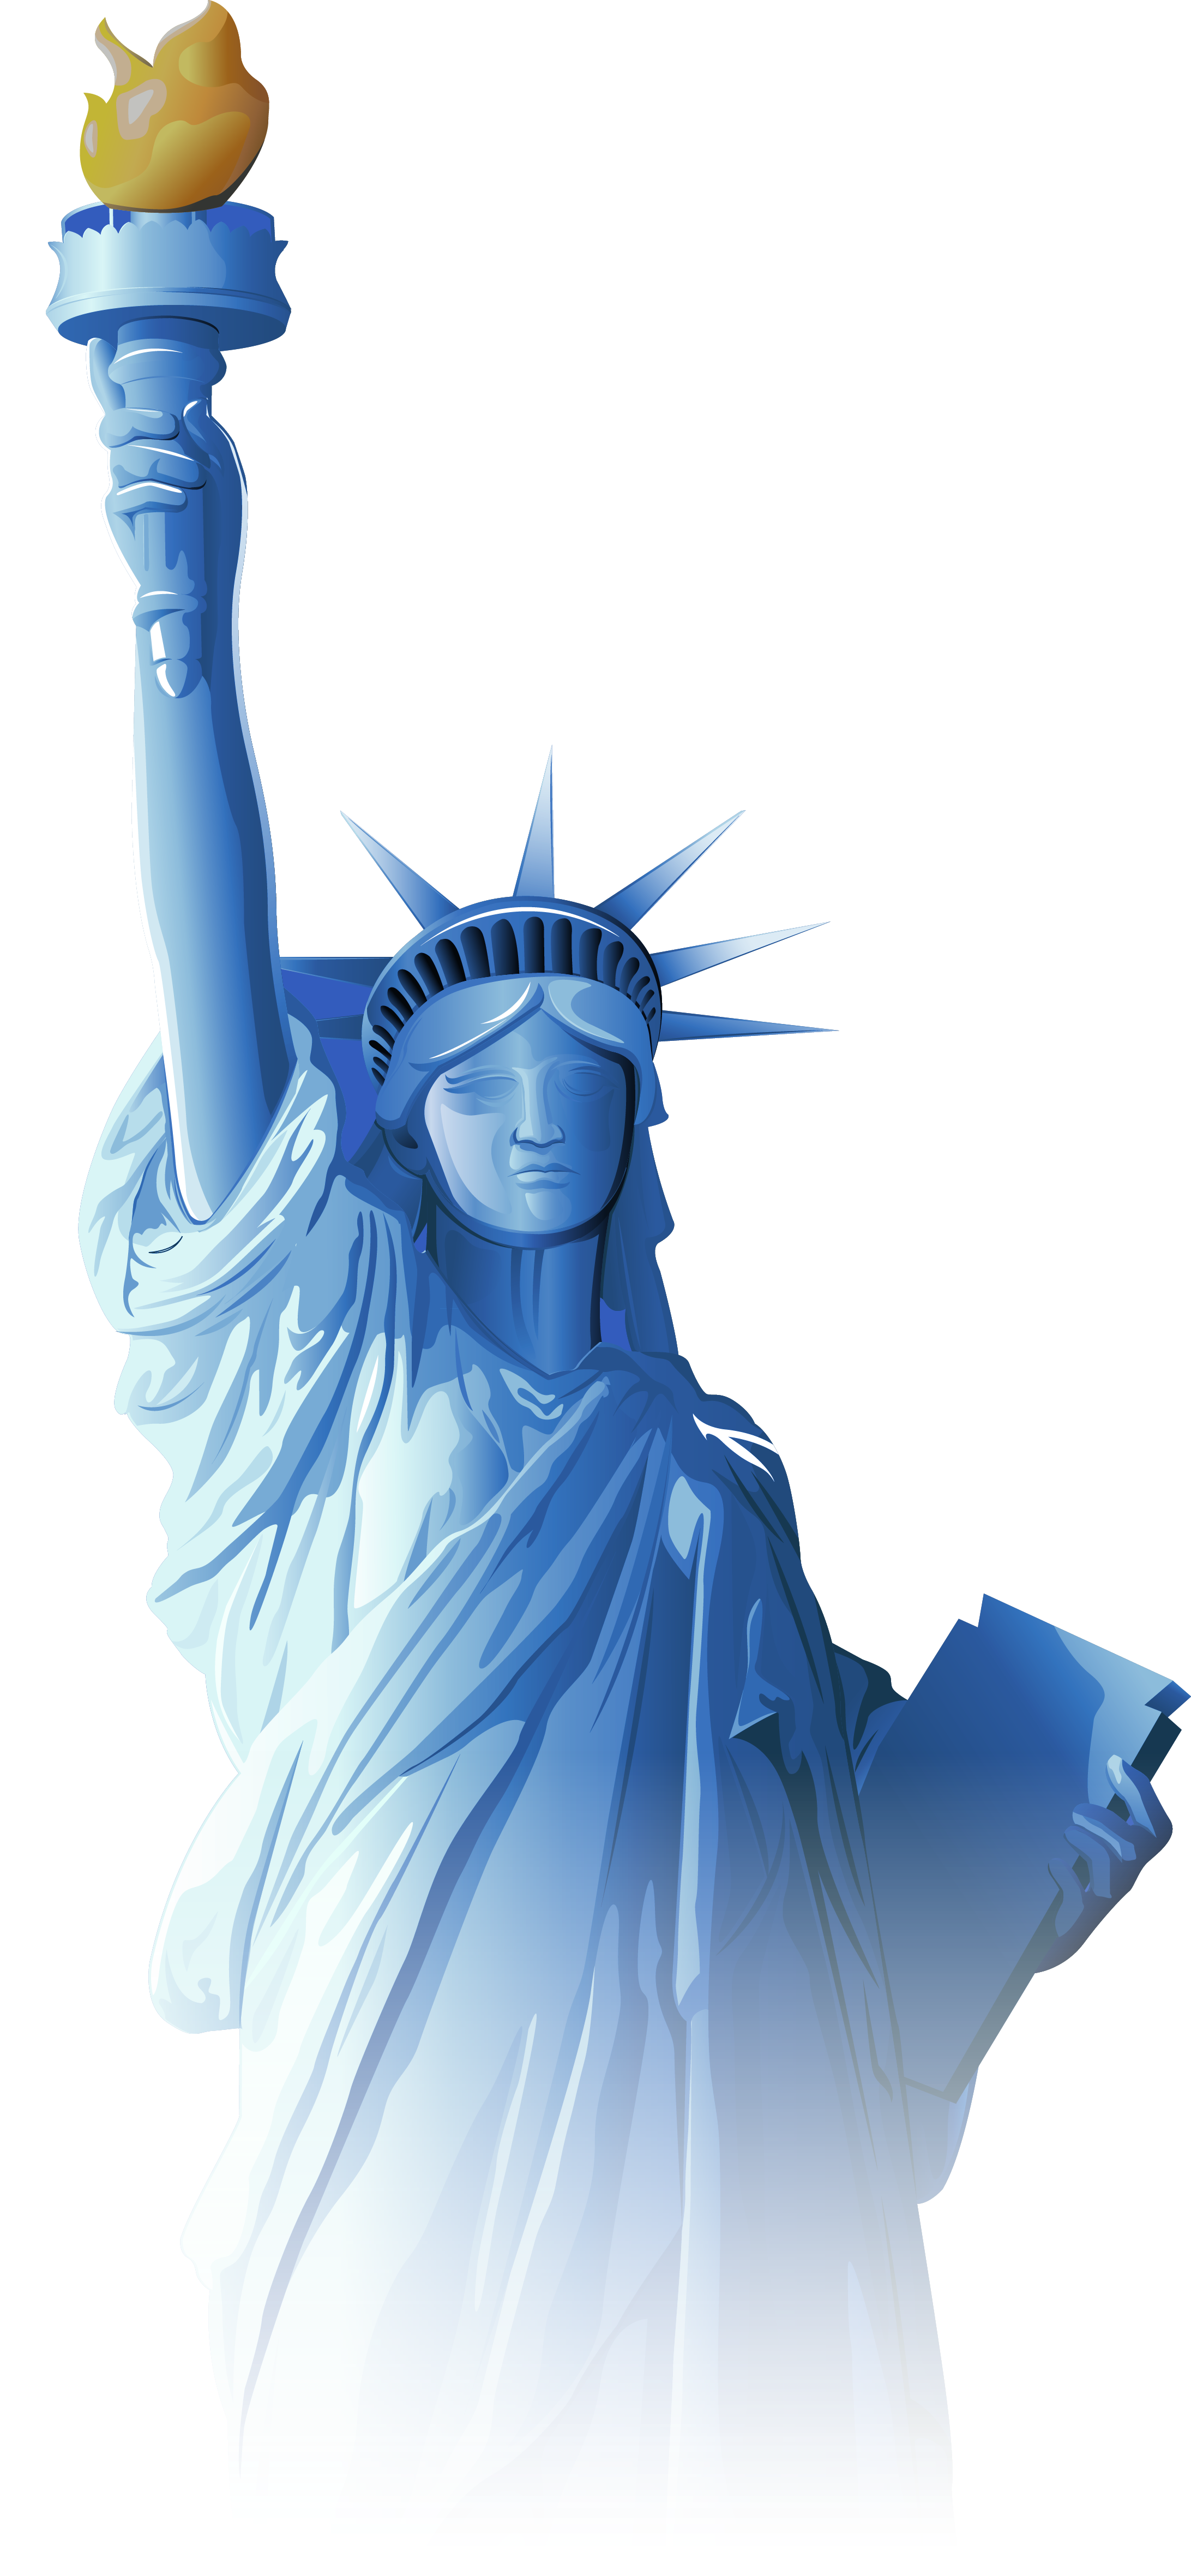 statue of liberty, statue liberty png images download #21210